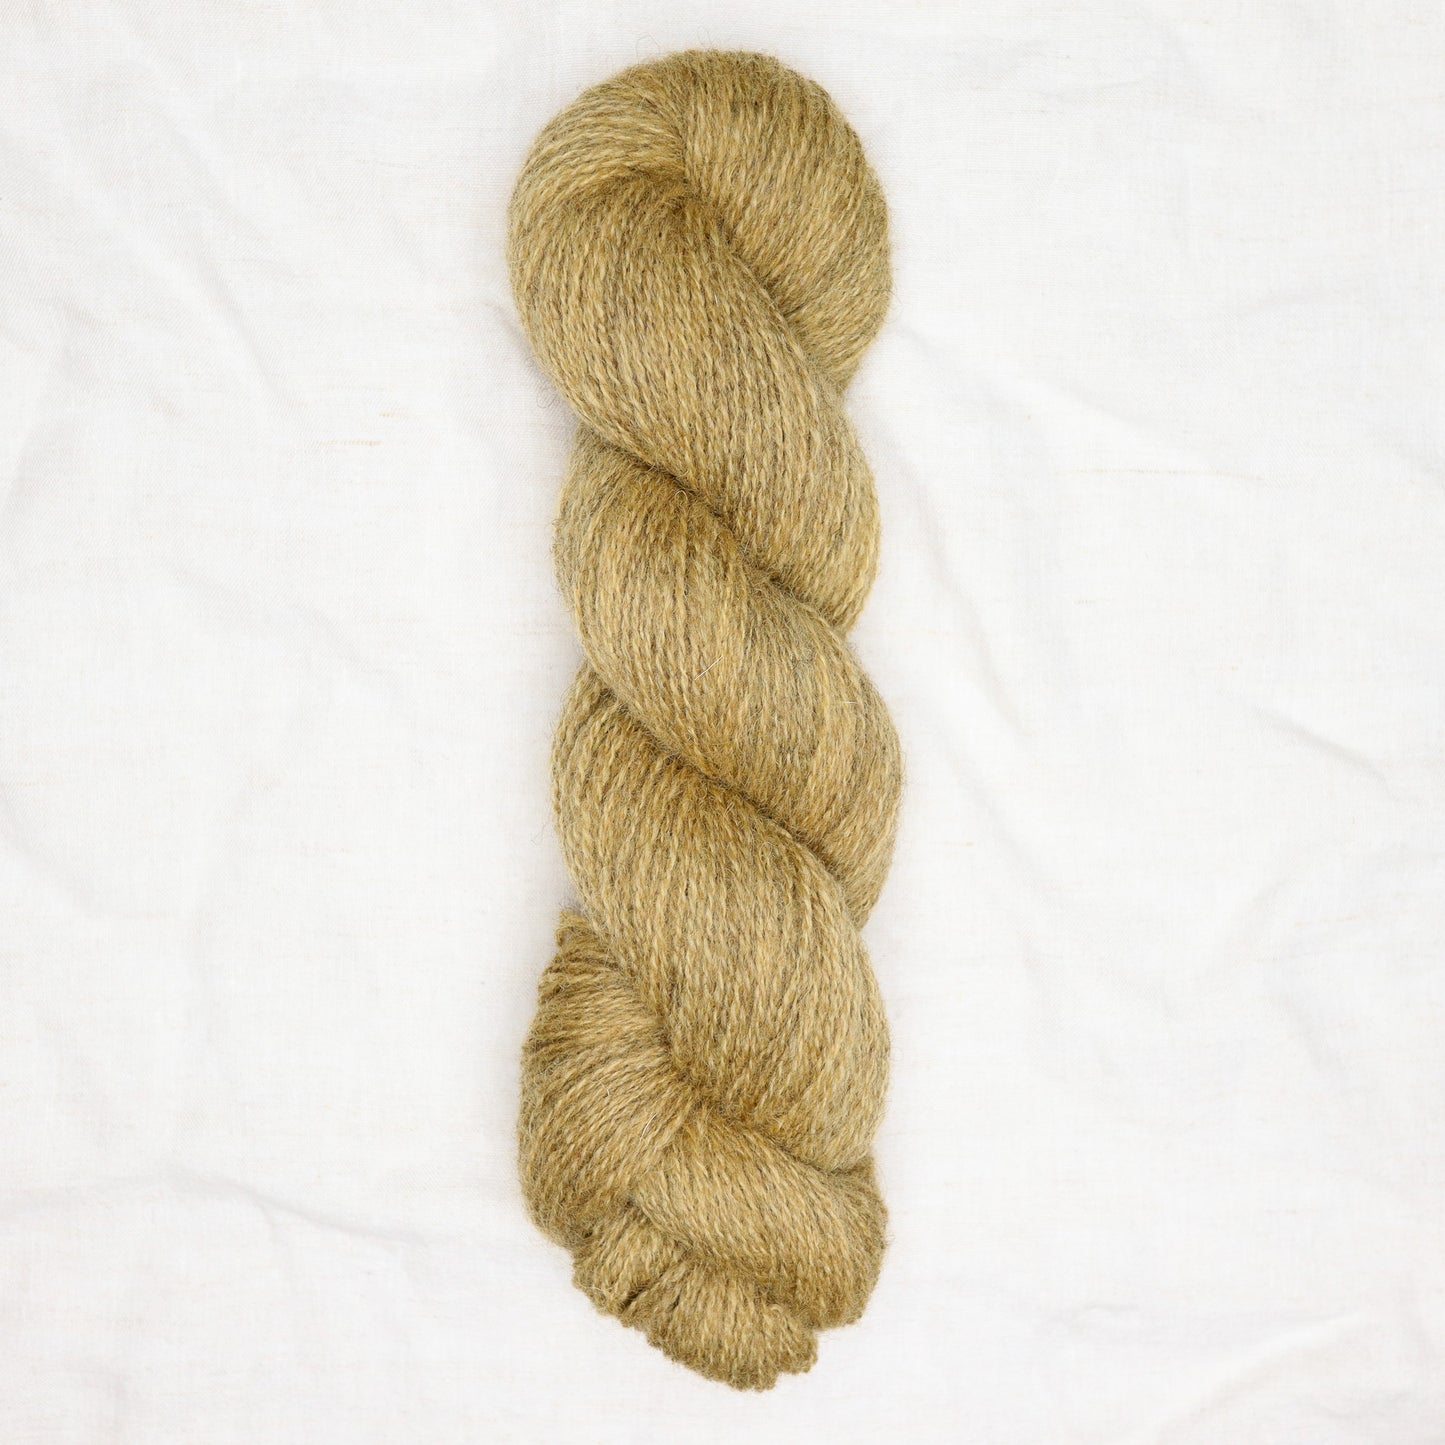 Roots 4ply - Straw